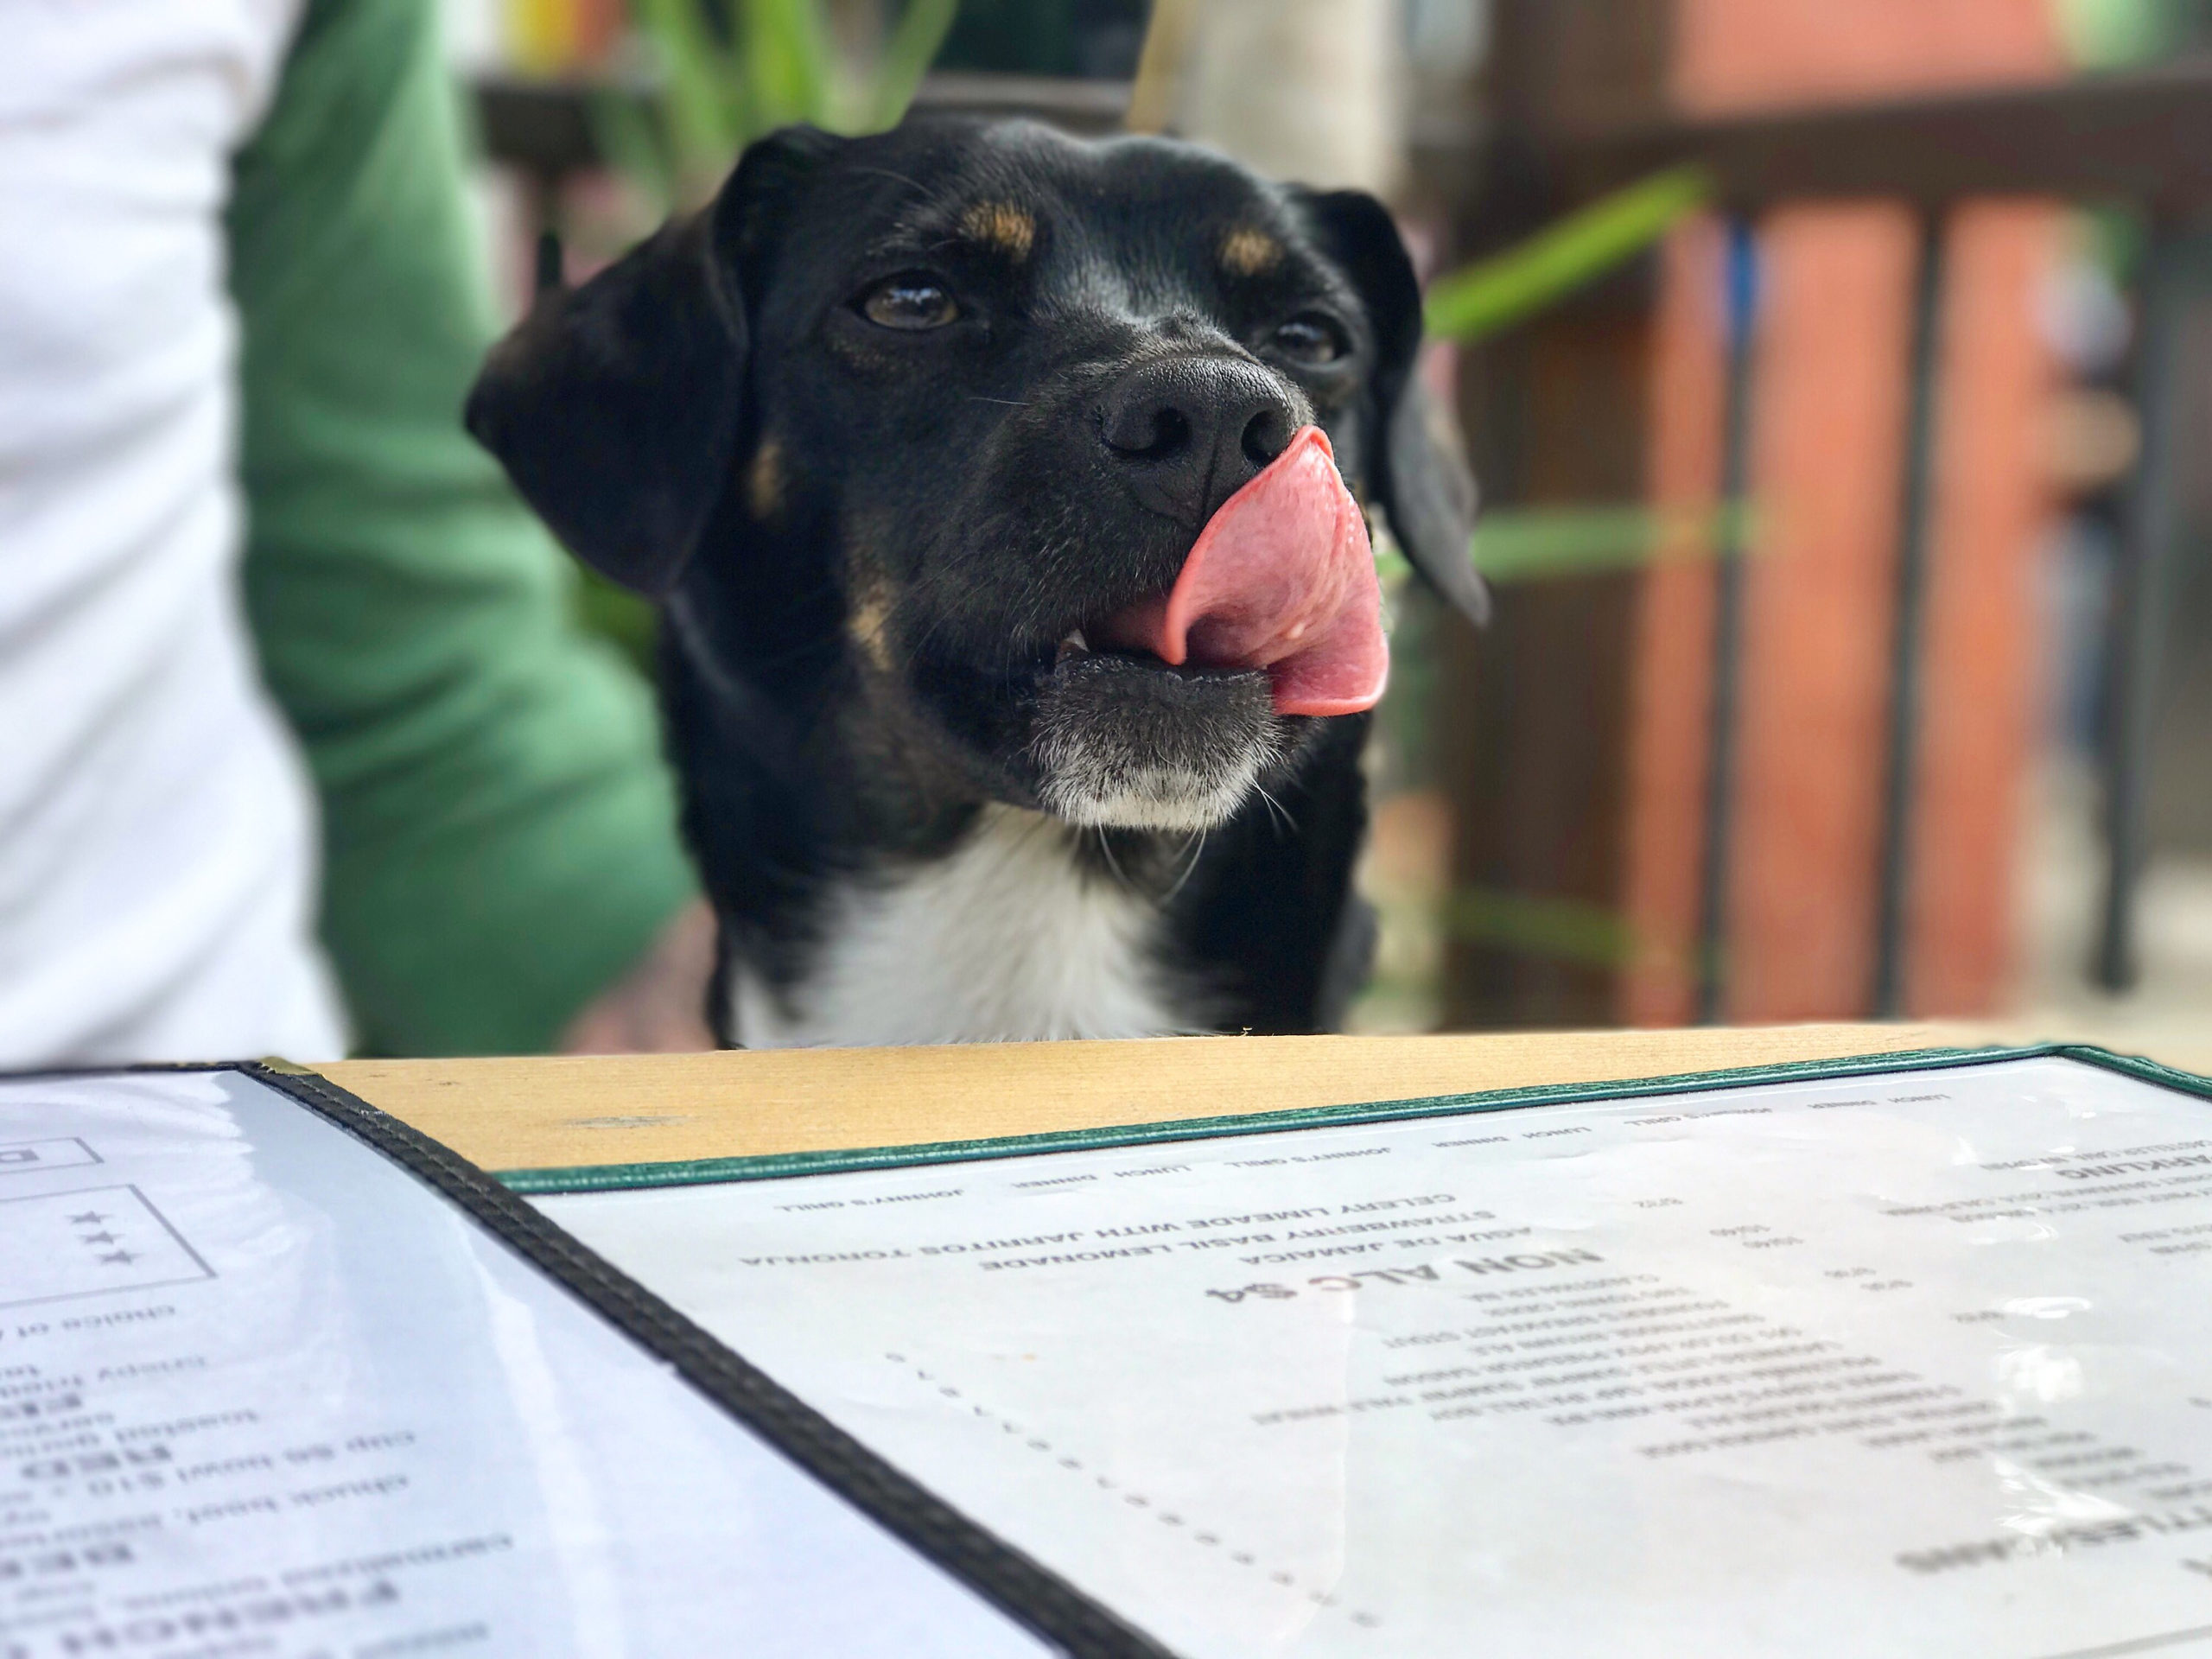 Discover 5 Dog Friendly Restaurants to Take Your Pup to in the NYC Summer -Dog licks chops at restaurant